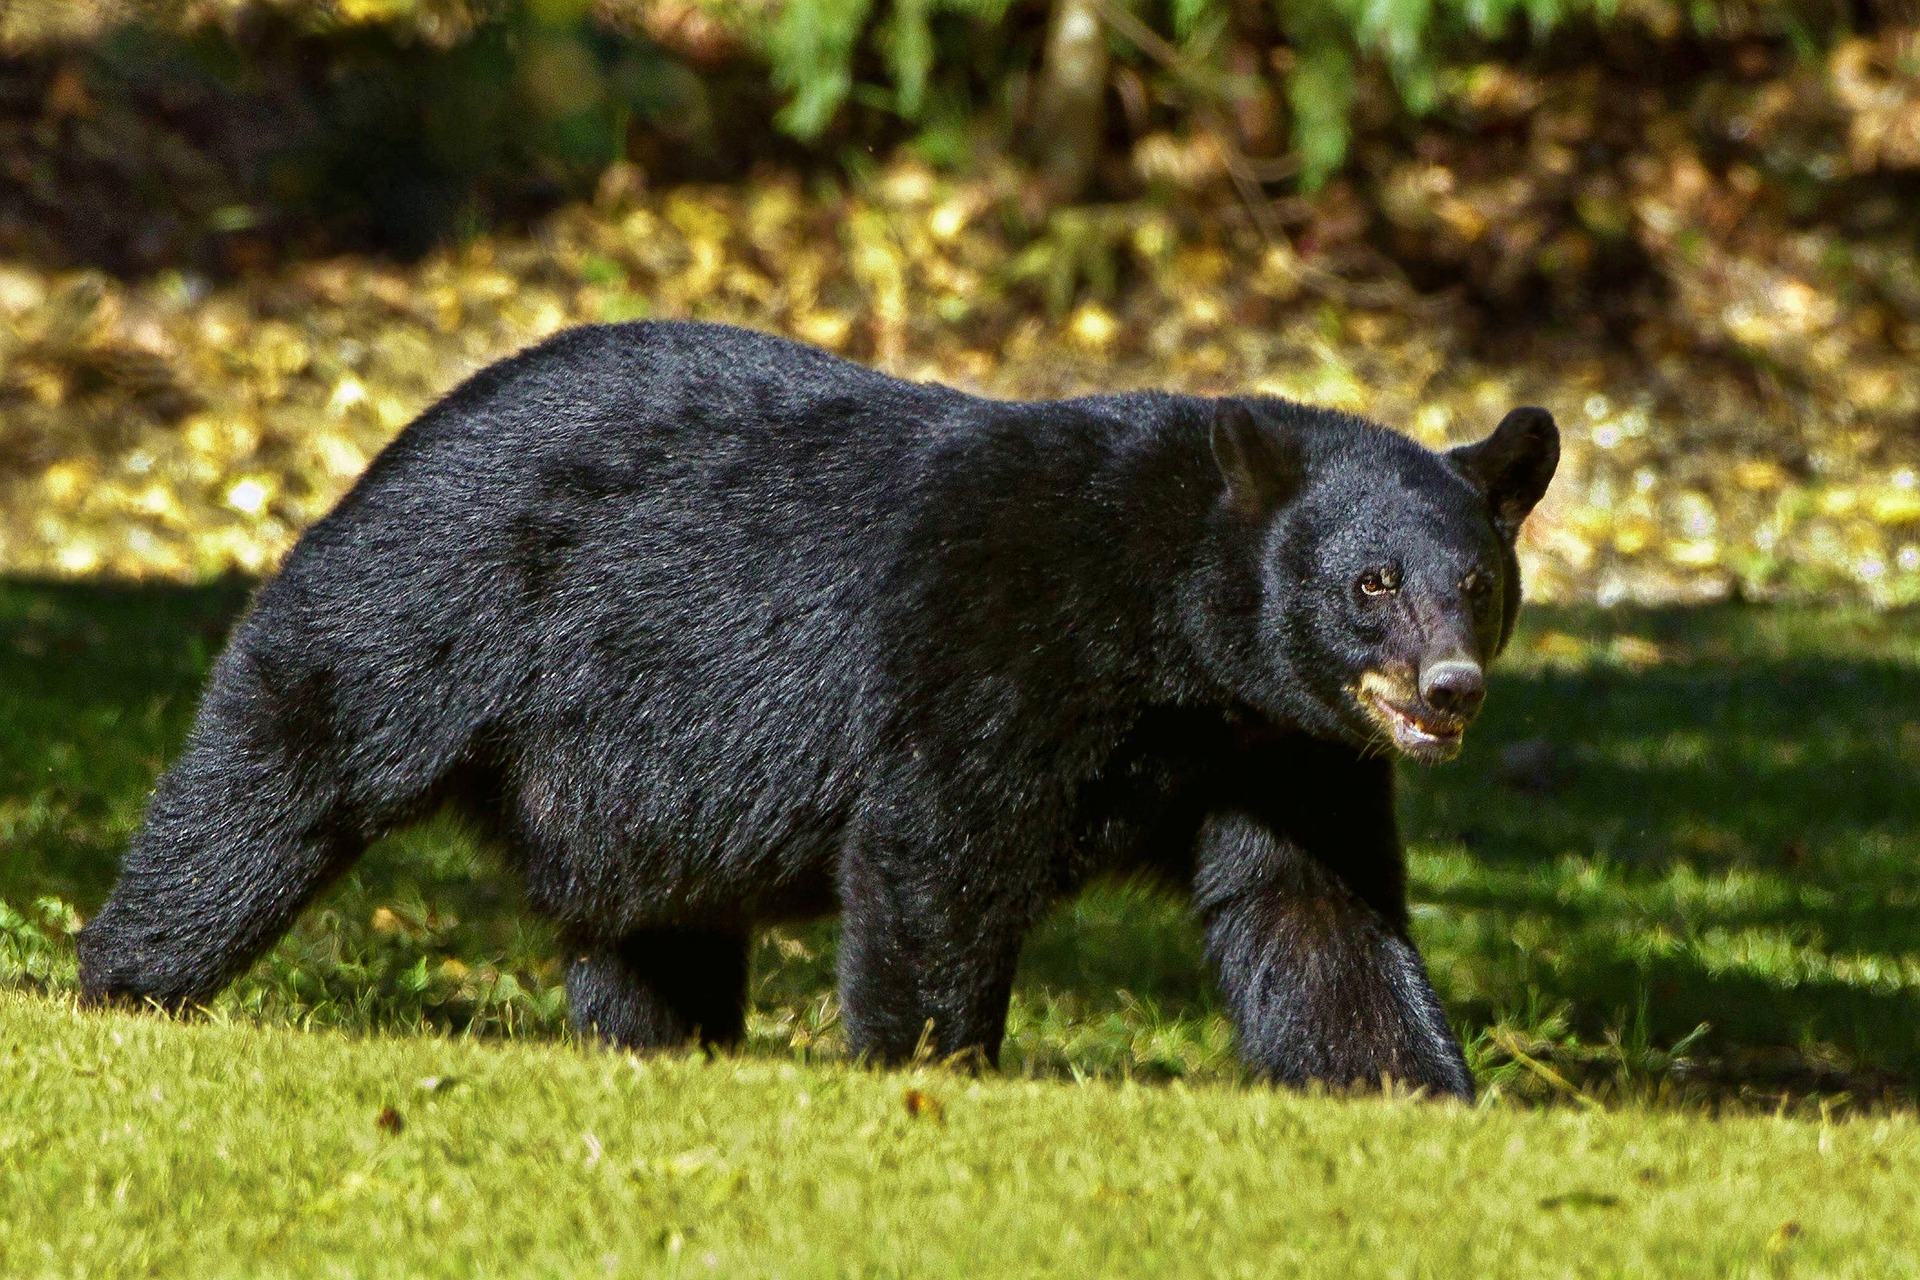 A black bear, which people can struggle to distinguish from other bears.